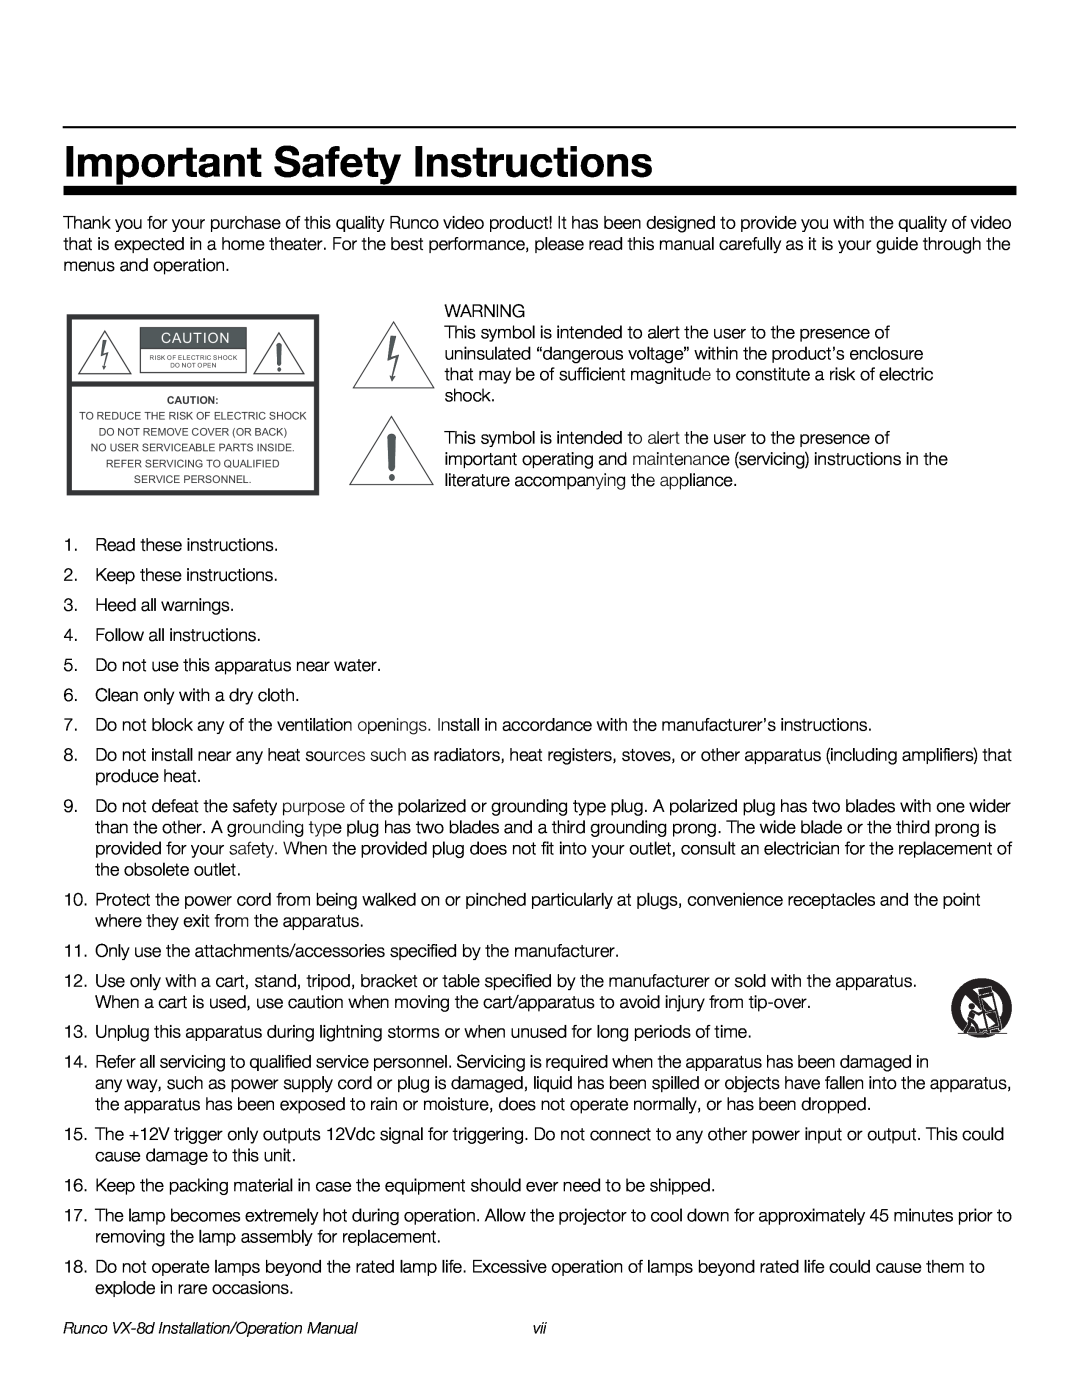 Runco VX-8D operation manual Important Safety Instructions 